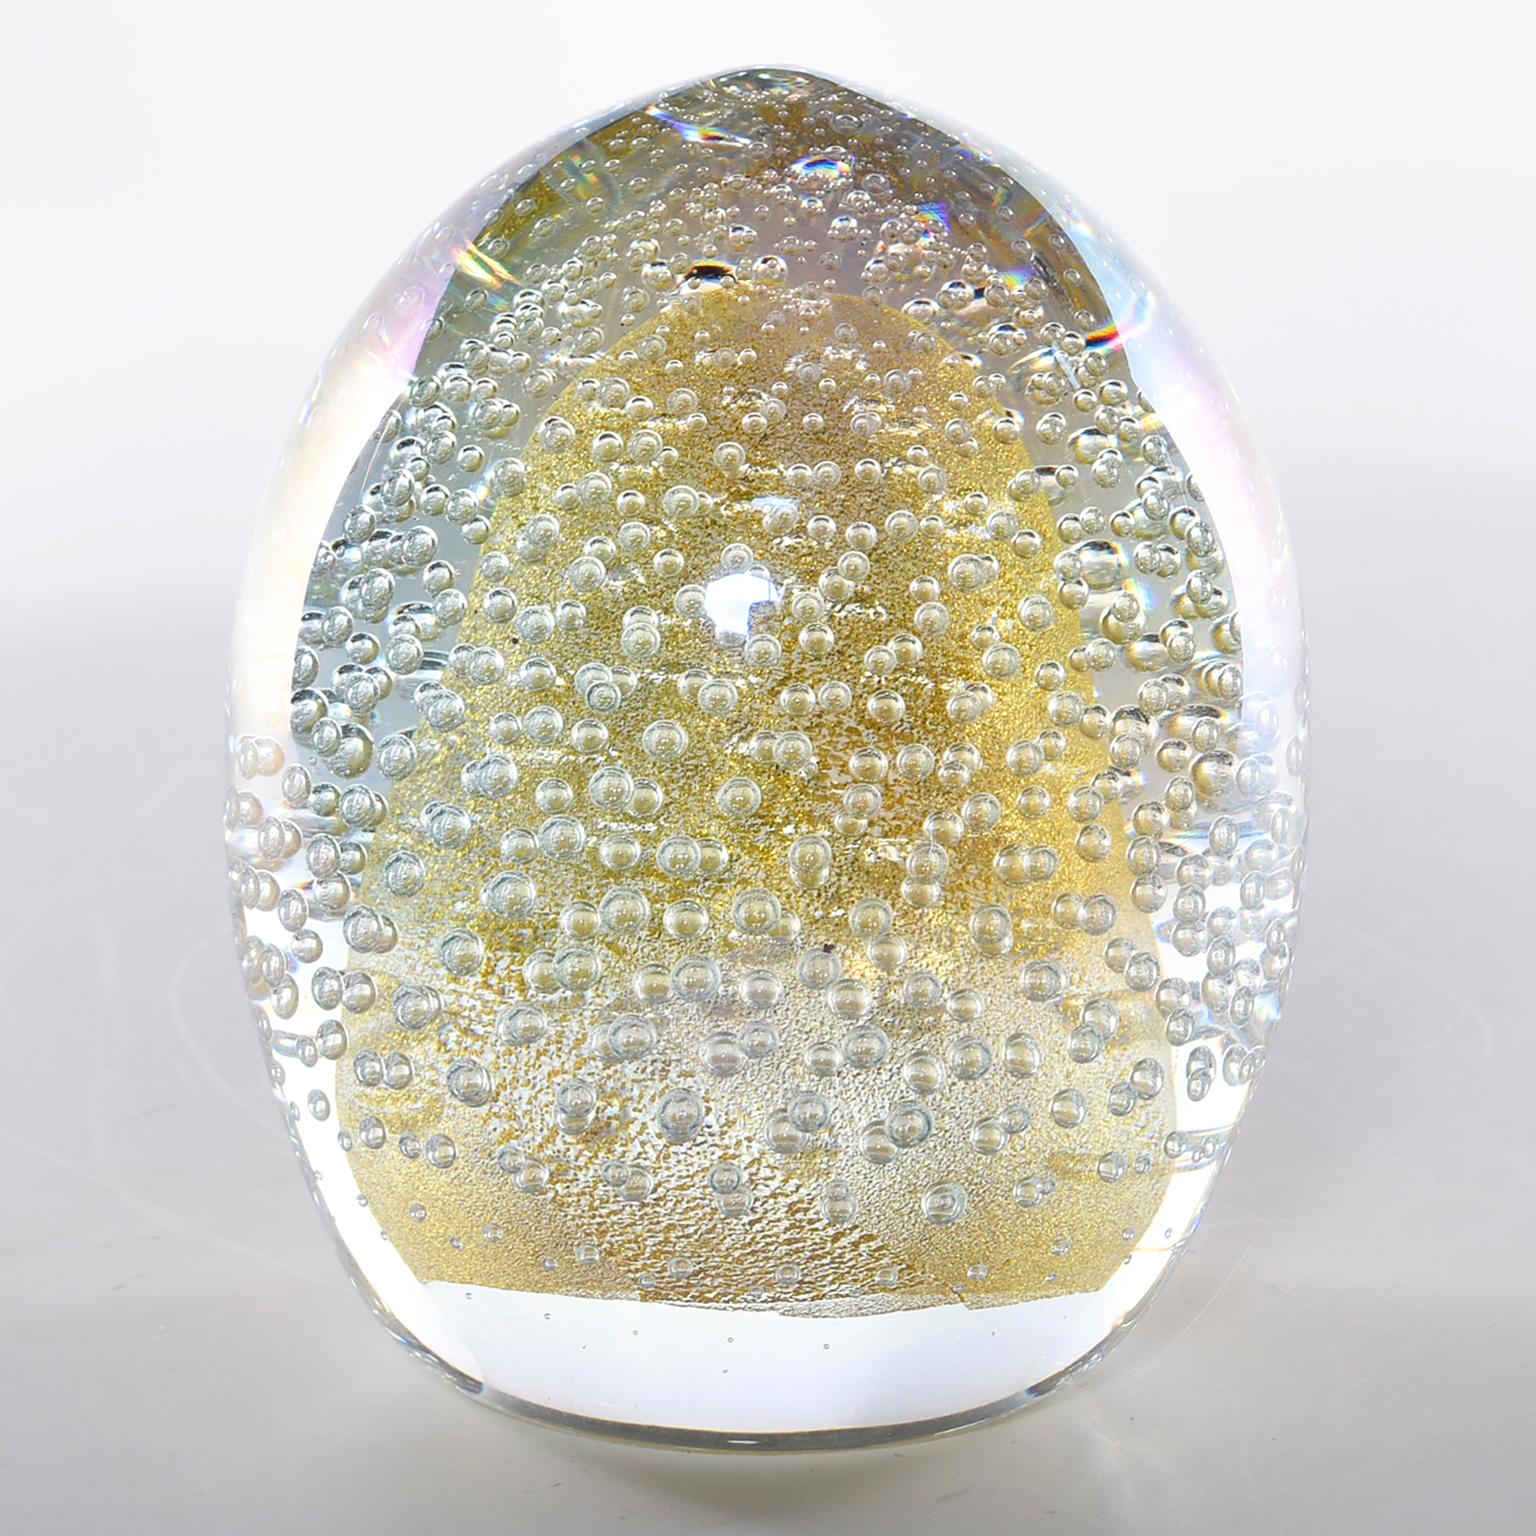 Seguso egg shaped paper weight in clear heavy glass with bubbles and gold inclusions, circa 1980s. Etched signature on underside of base. Two available at time of posting, sold and priced individually.